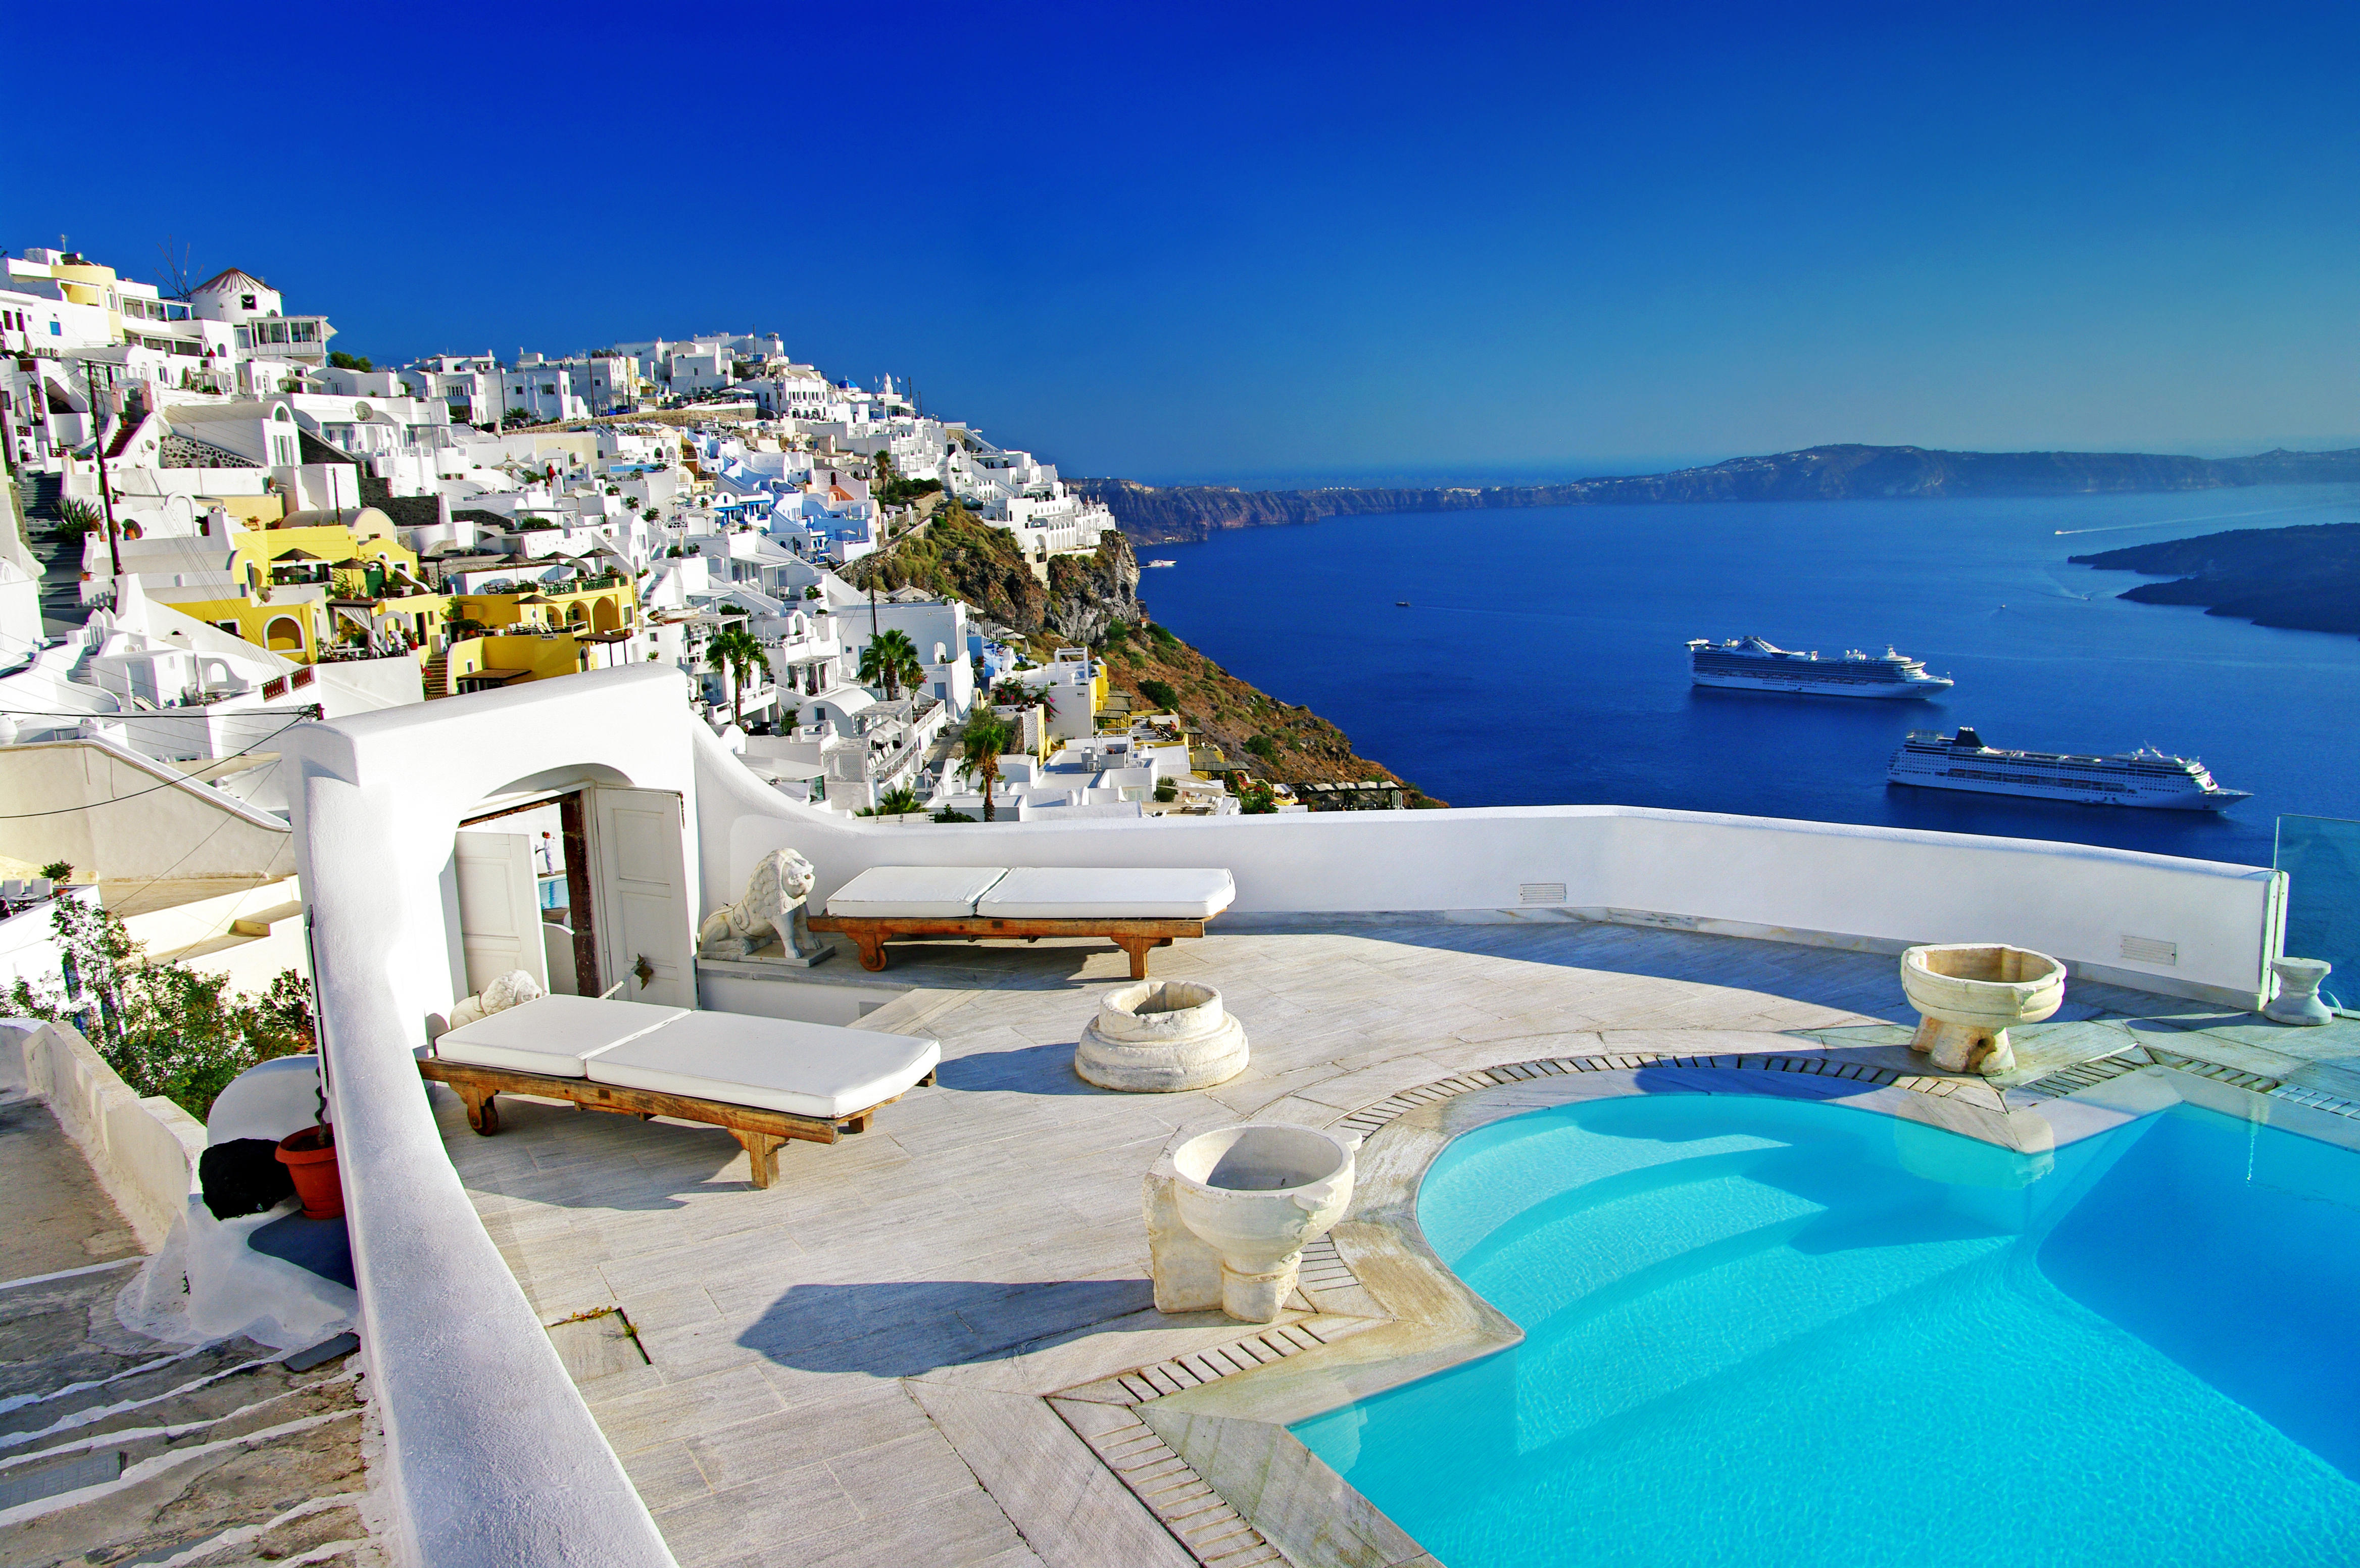 Free photo The most beautiful pictures greece, santorini